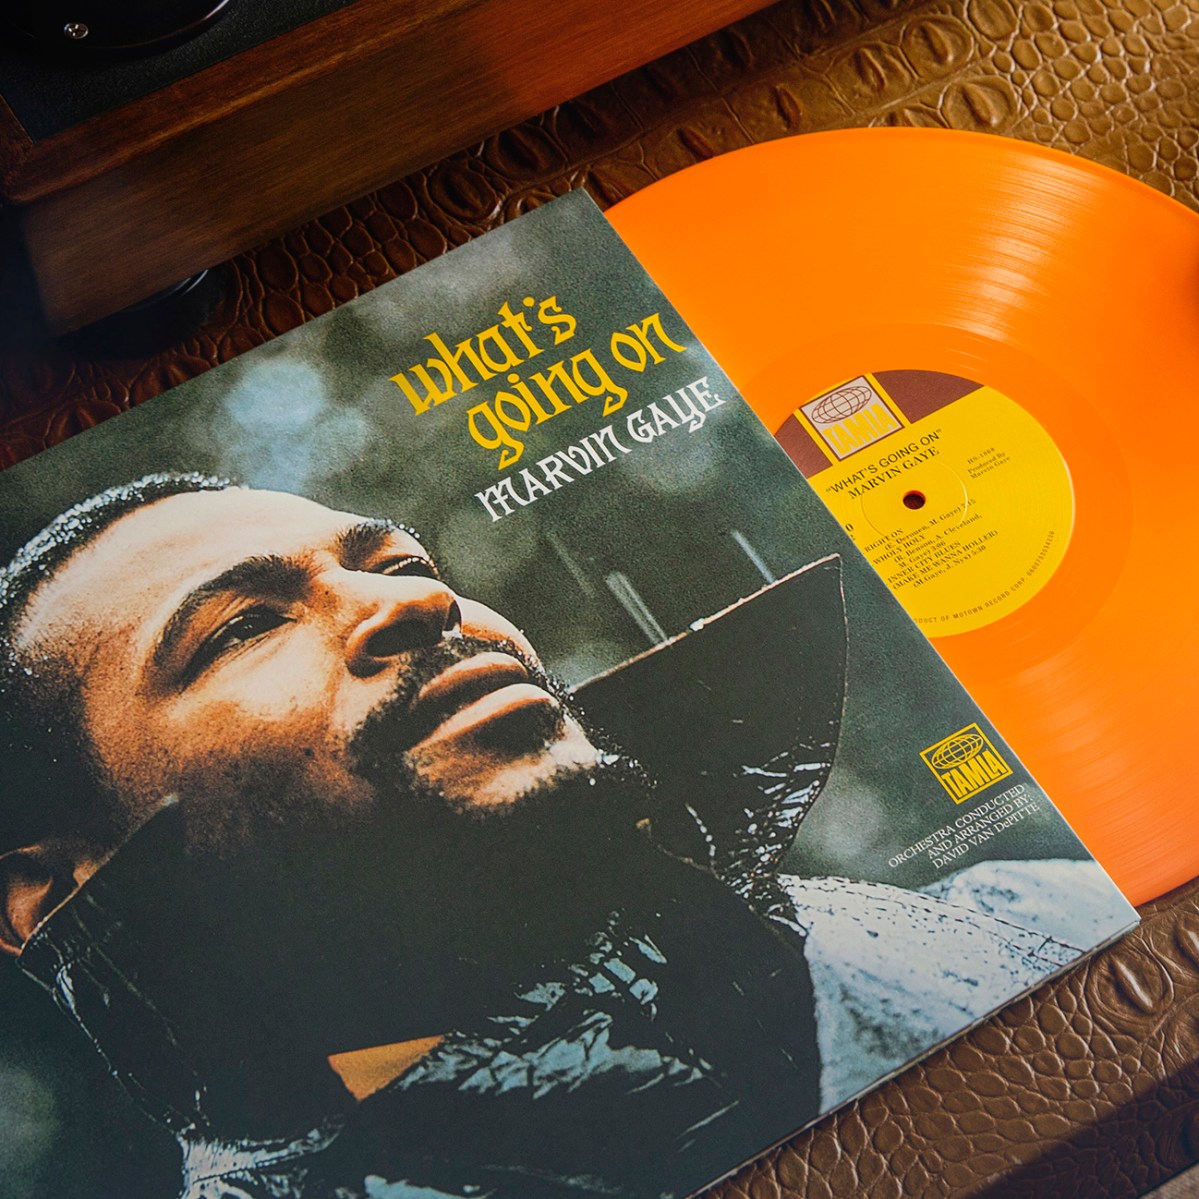 Master & Dynamic is proud to celebrate Marvin Gaye’s legacy.